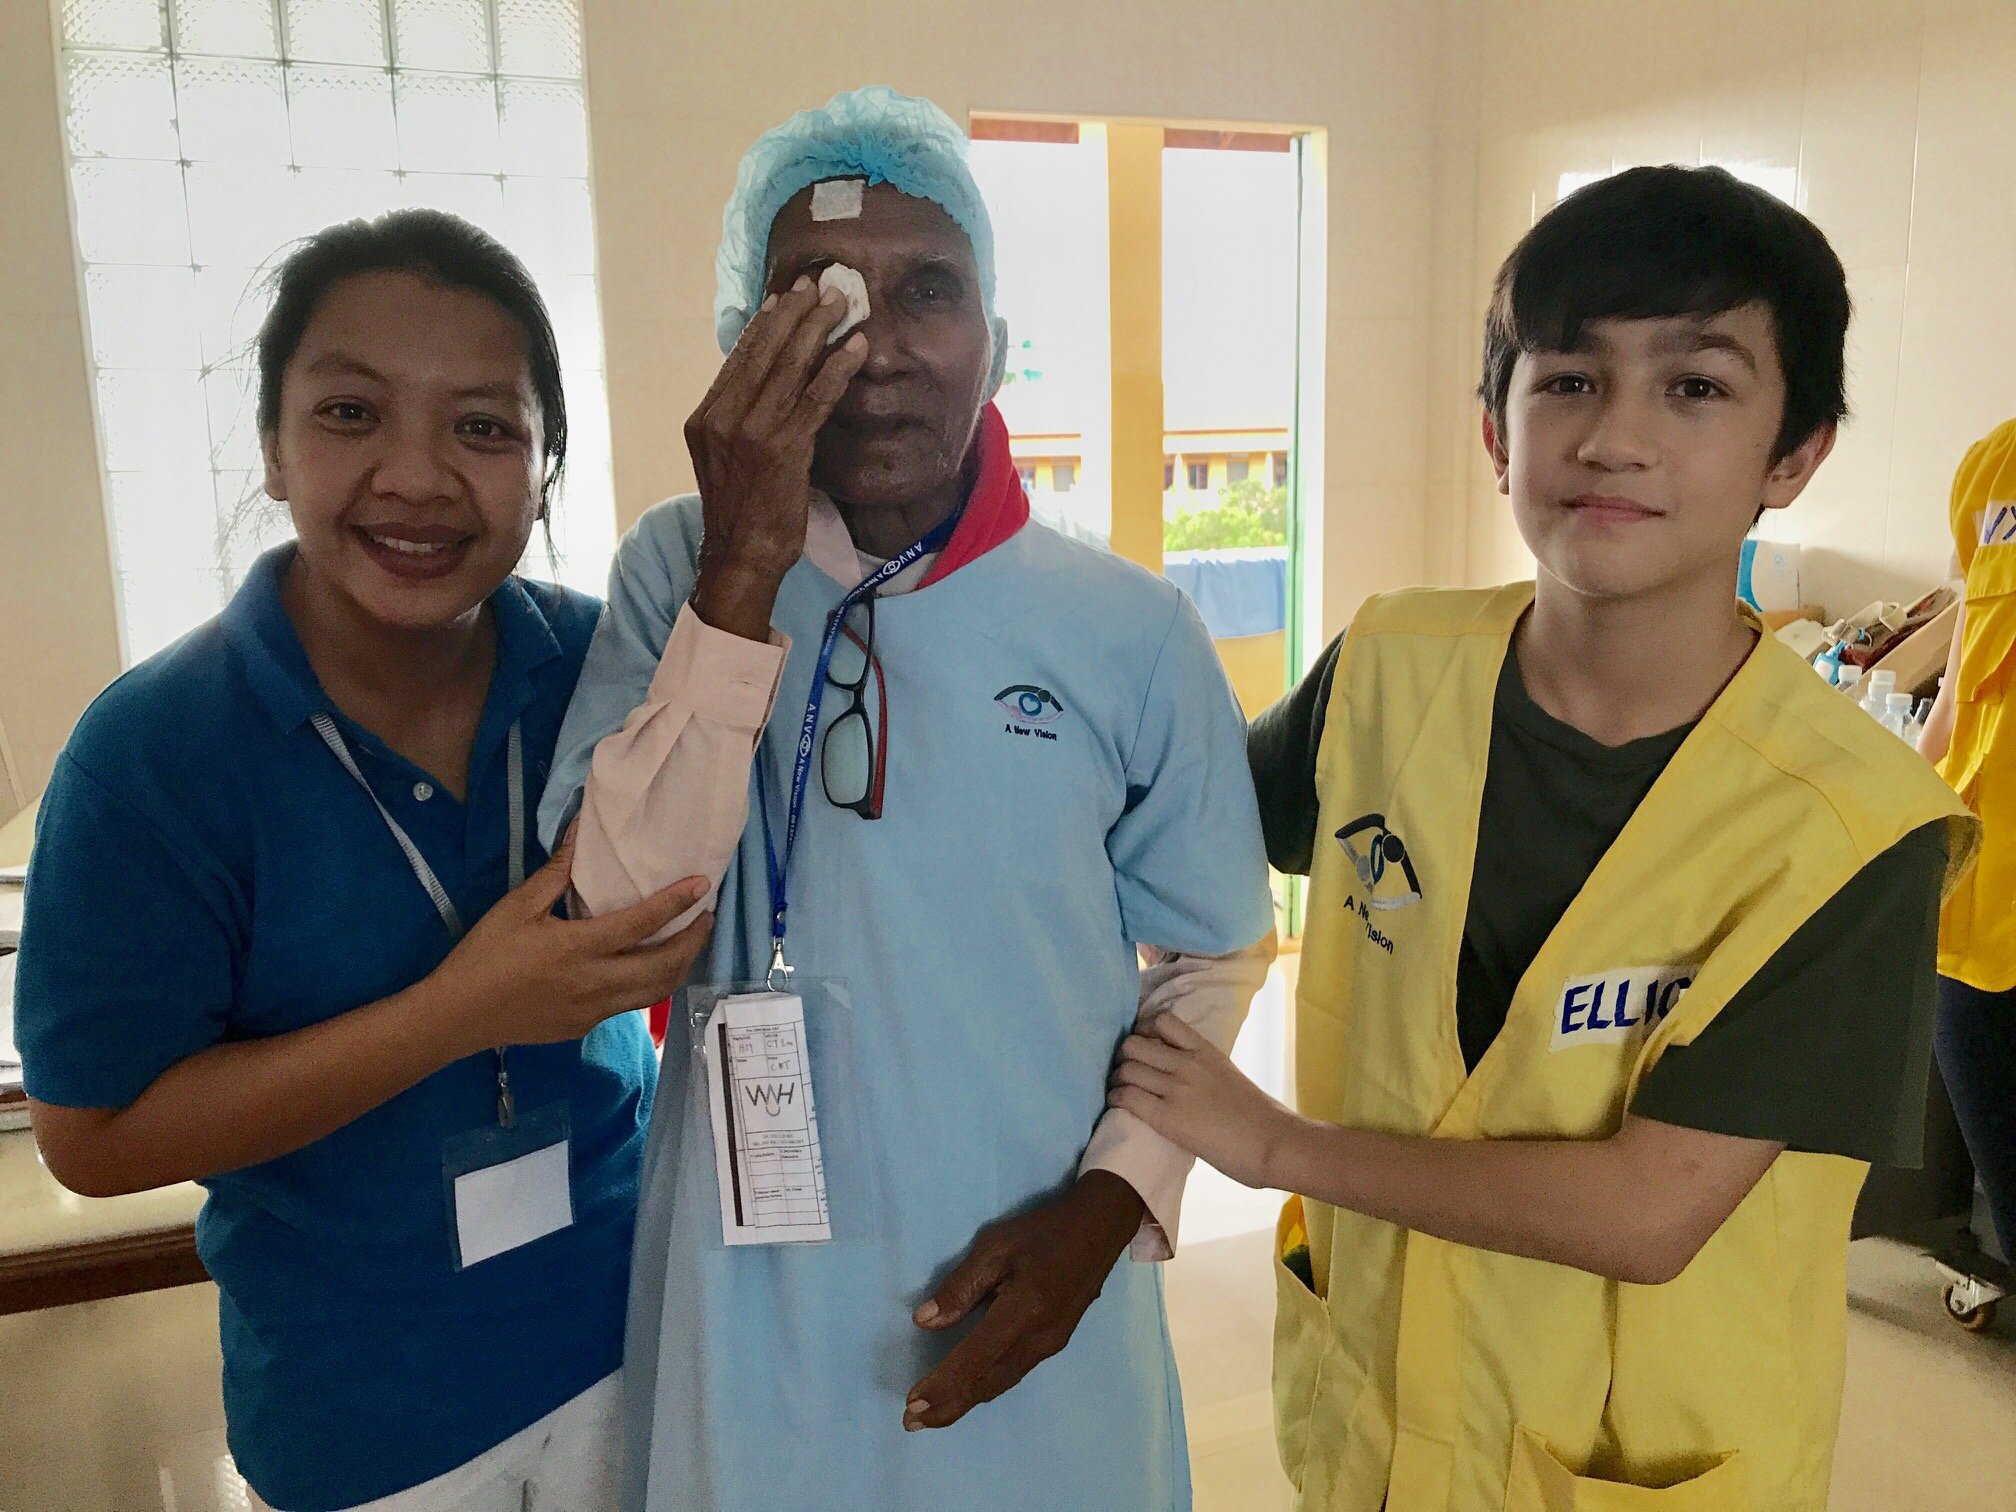 WAH Cambodia Cataract Dr Rany with patient and young ambassador Elliott.jpg